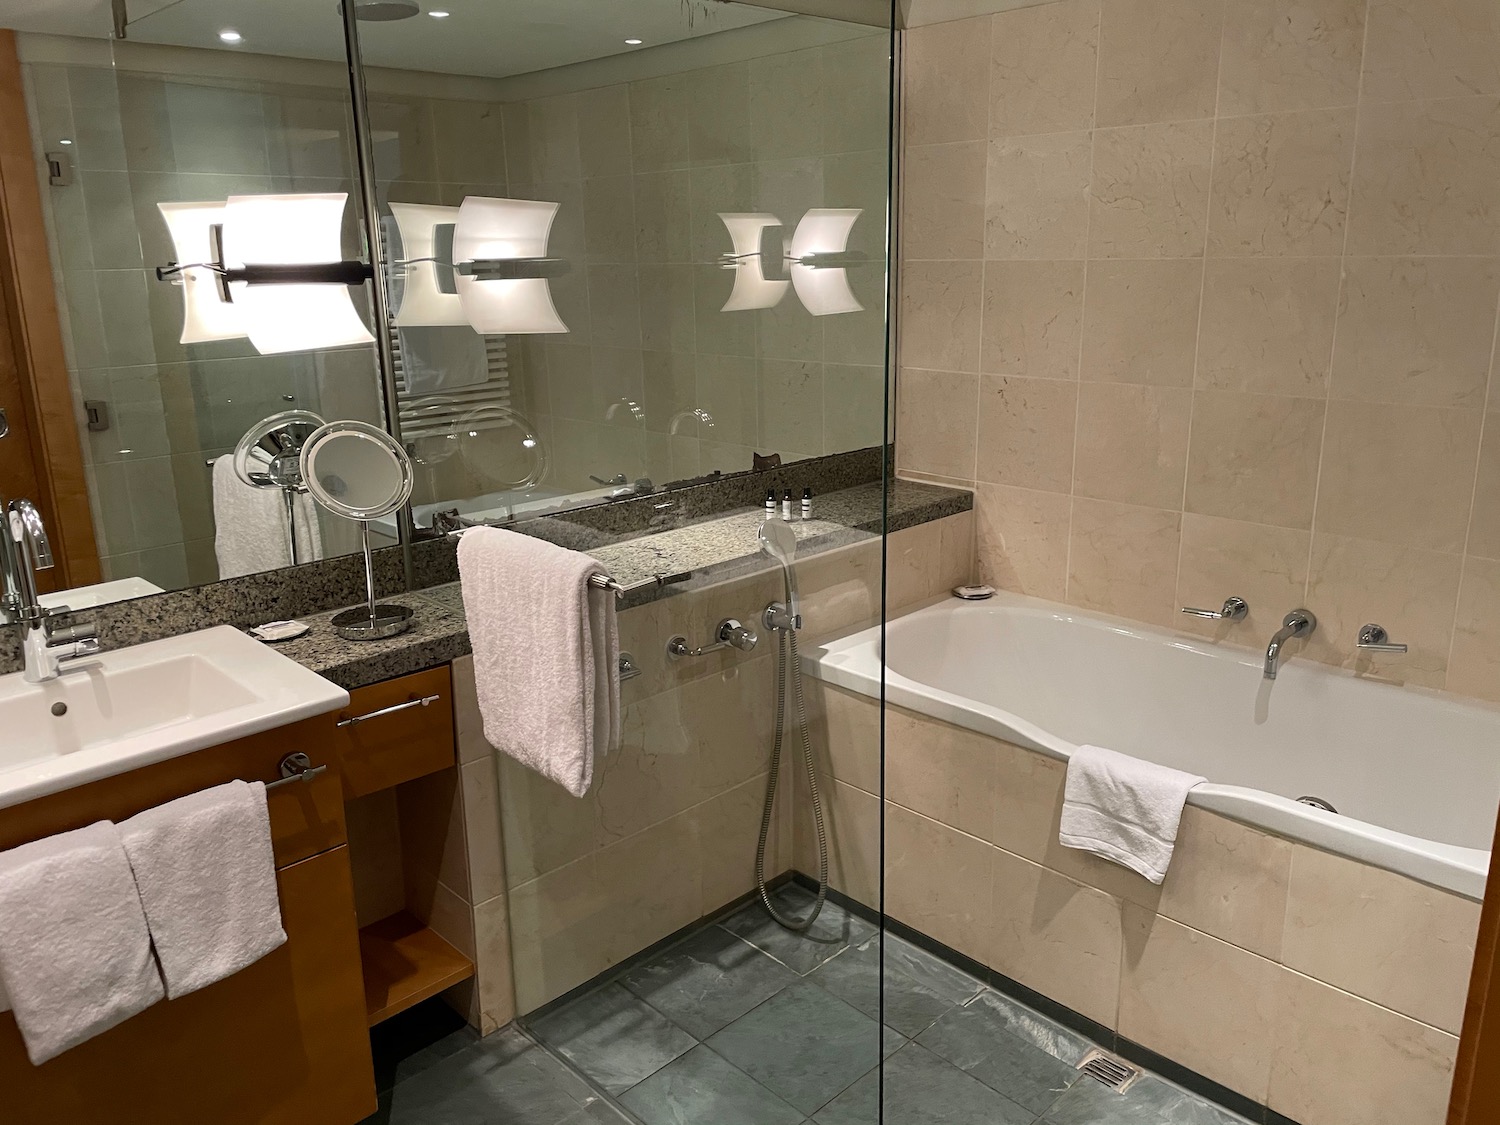 a bathroom with a glass shower door and tub